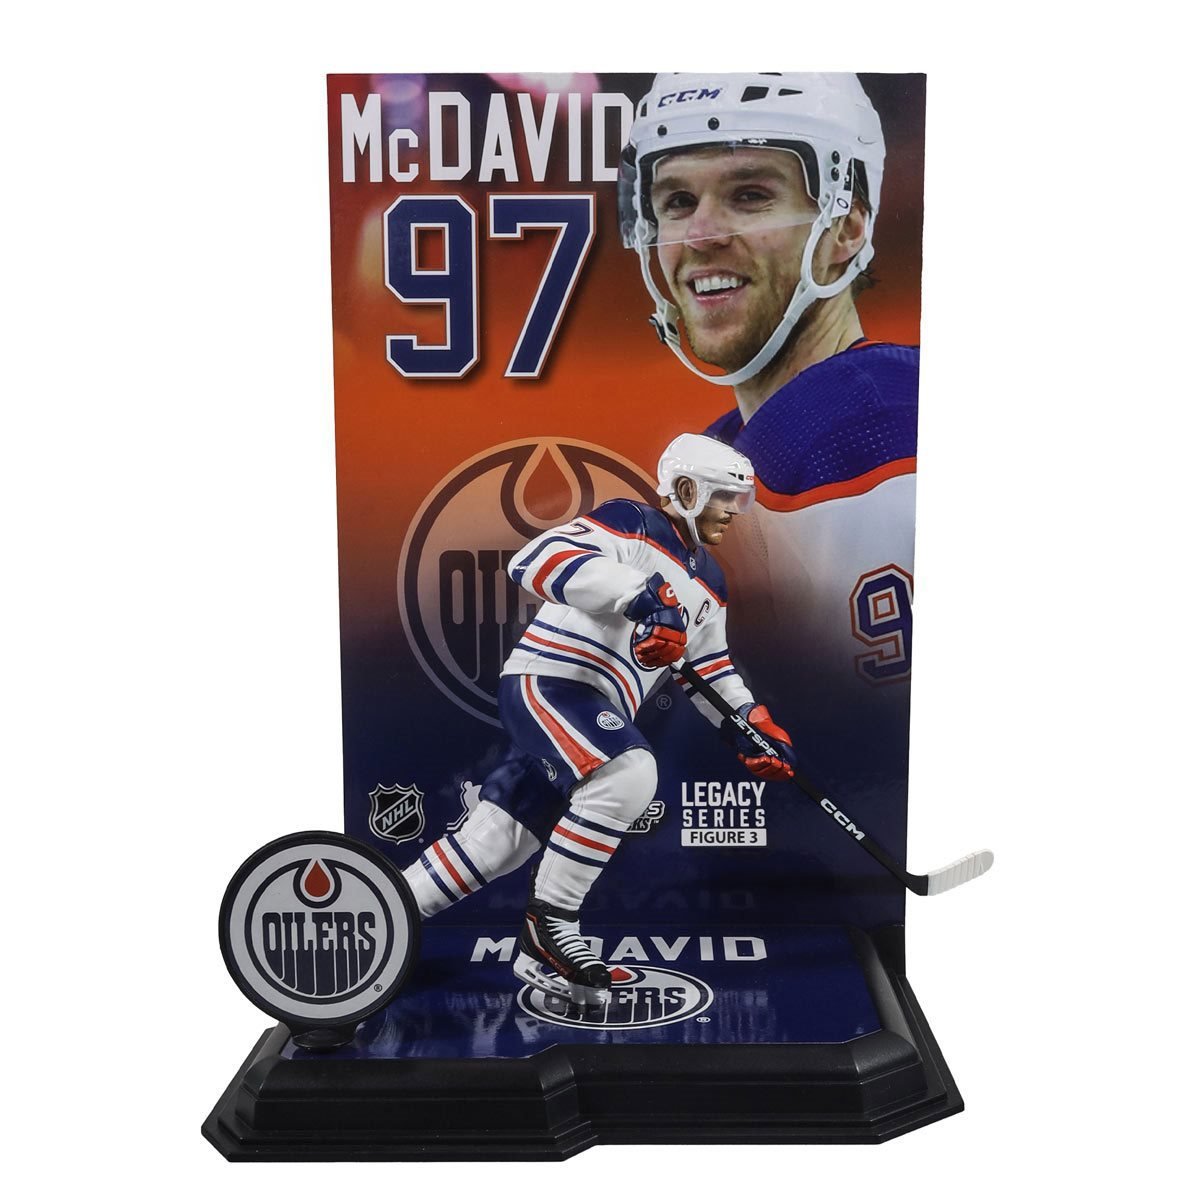 Connor McDavid Cards - Collecting Hockey's Next Big Thing